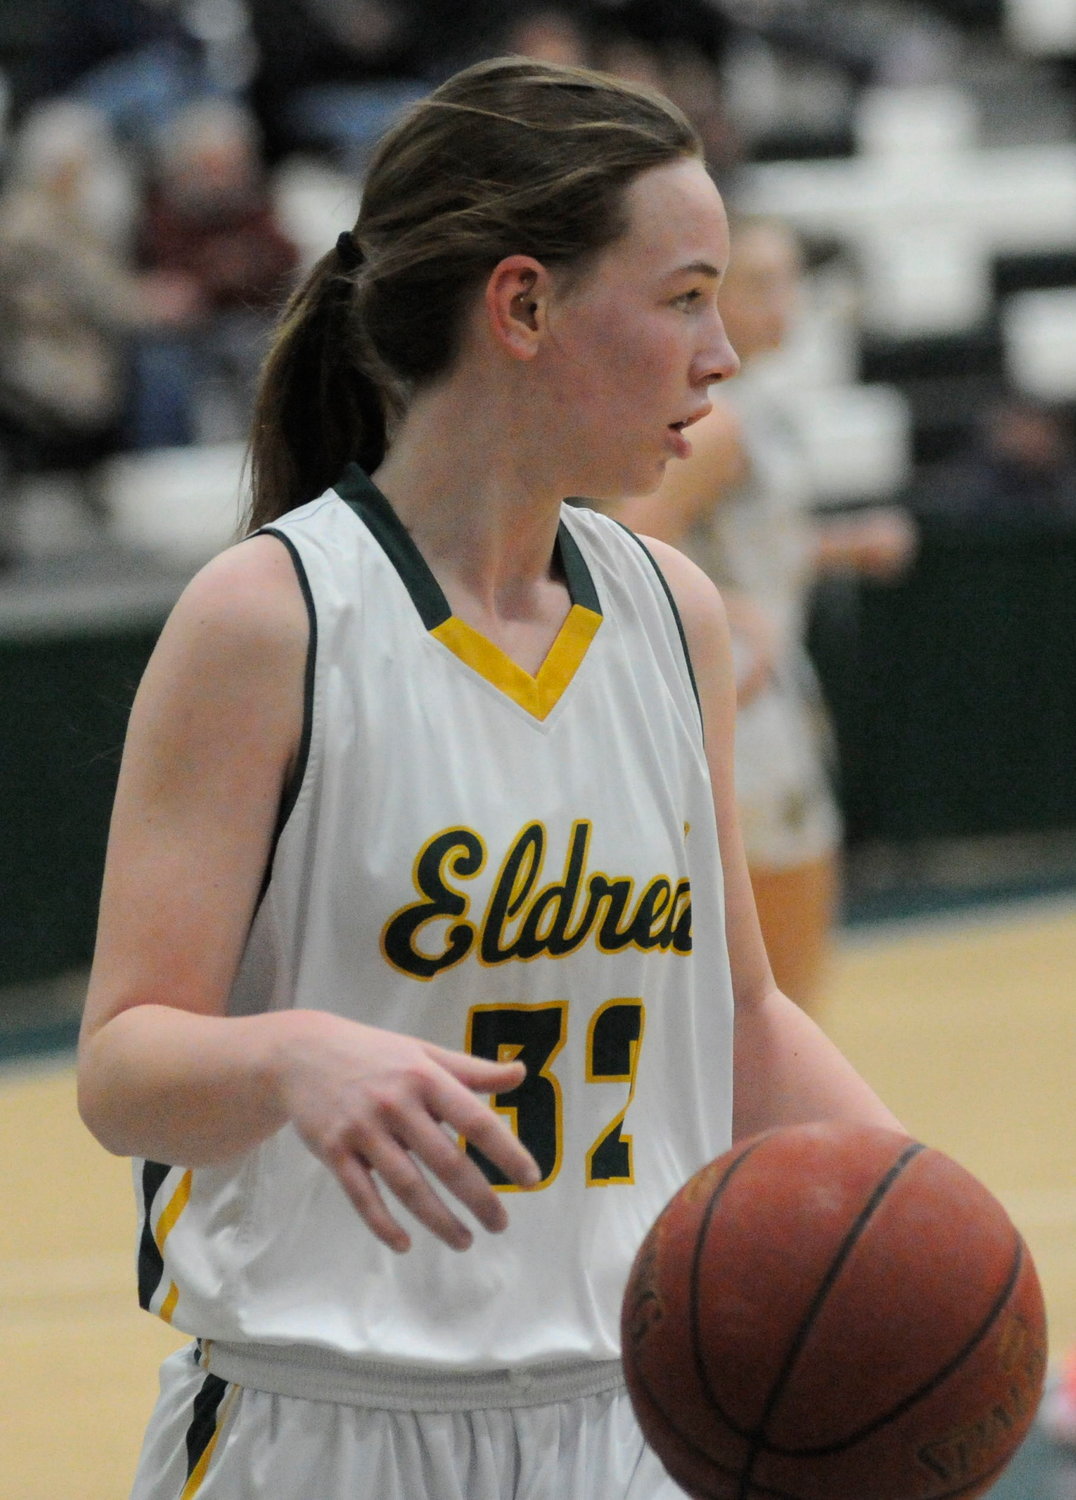 Eldred’s Molly McKerrell added 3 points to the Lady Yellowjackets’ scorebook.